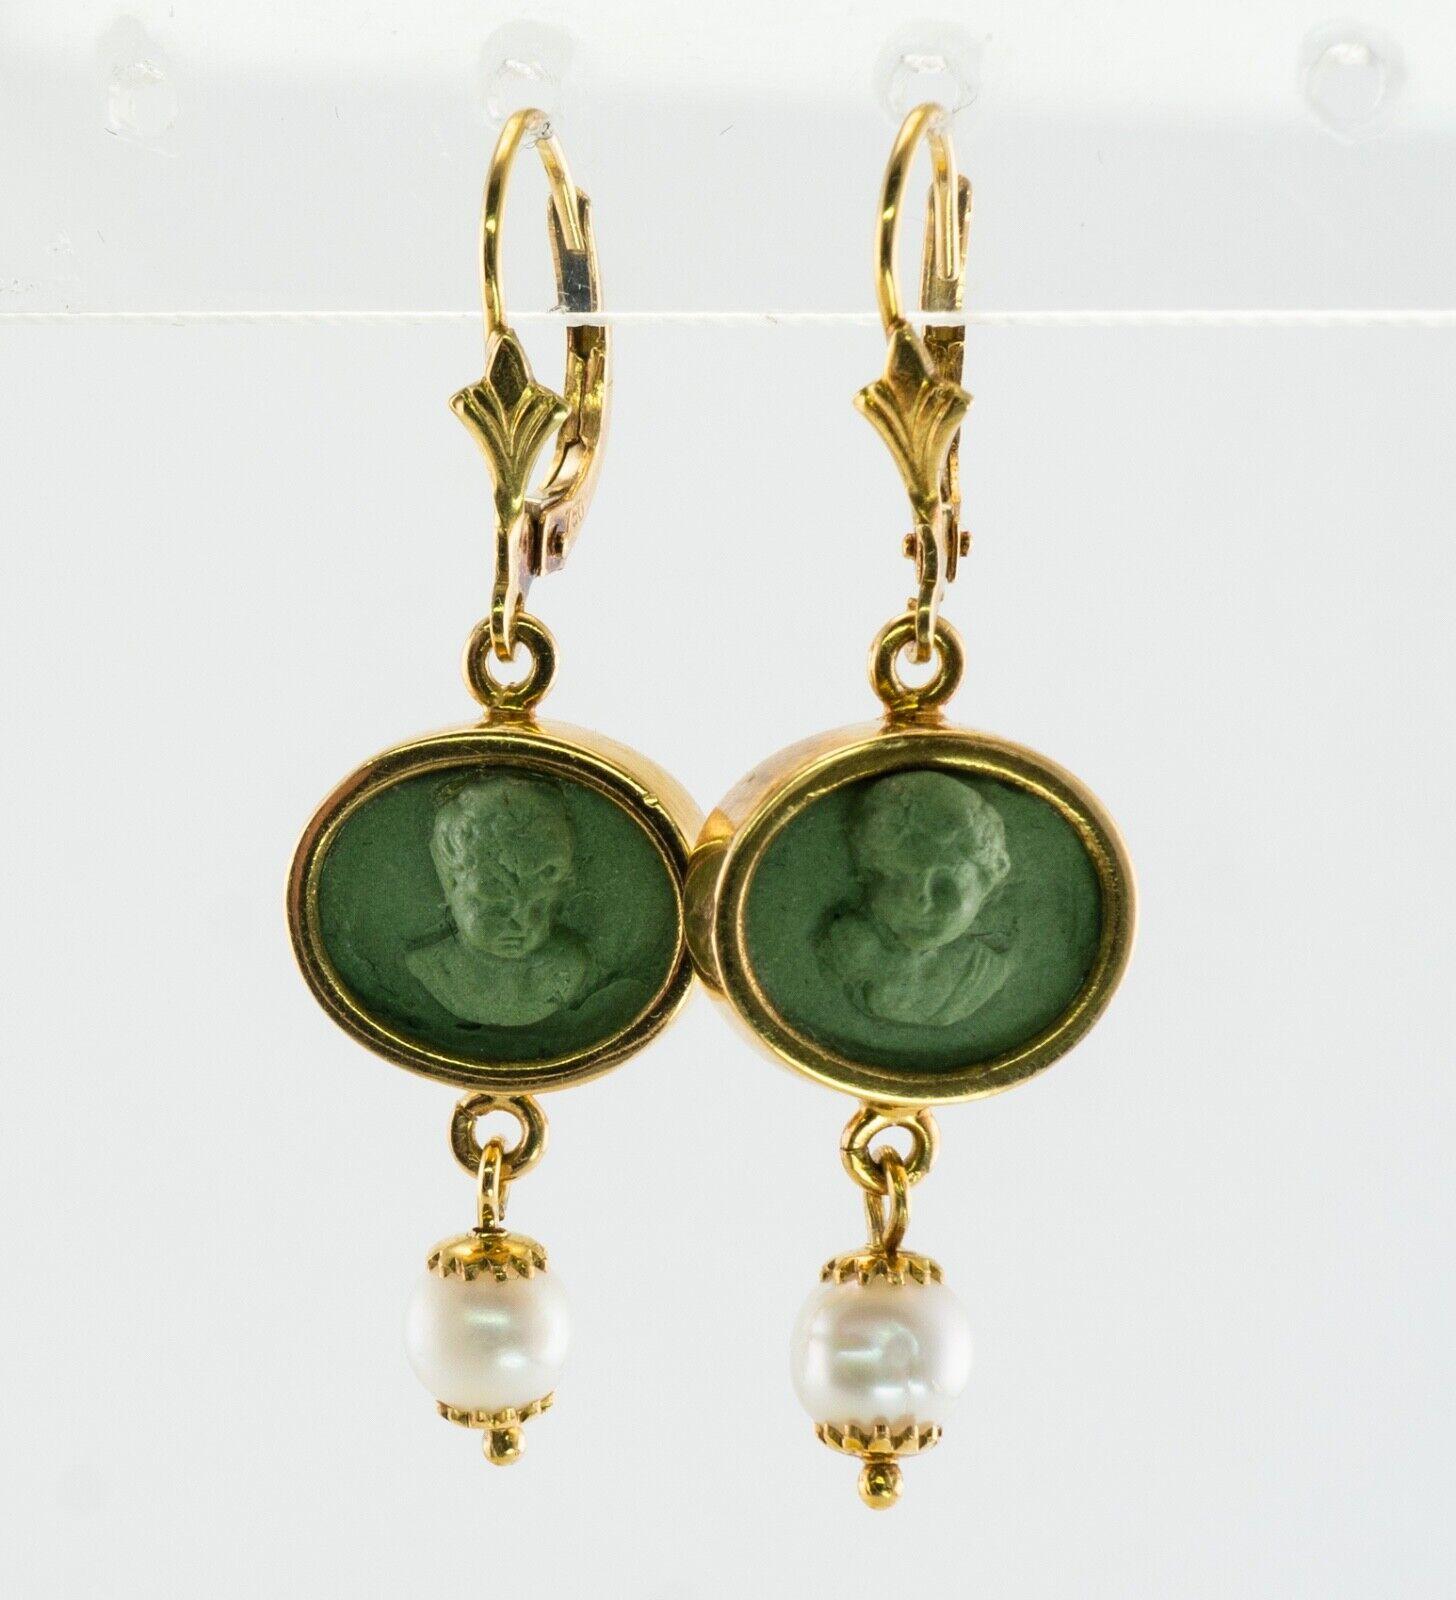 This gorgeous pair of earrings is finely crafted in solid 18K Yellow gold, they also have a hallmark. Green volcanic Lava high profile cameos depict the head of cherubs or angels. They are highly detailed and very well made. The bottom dangling part